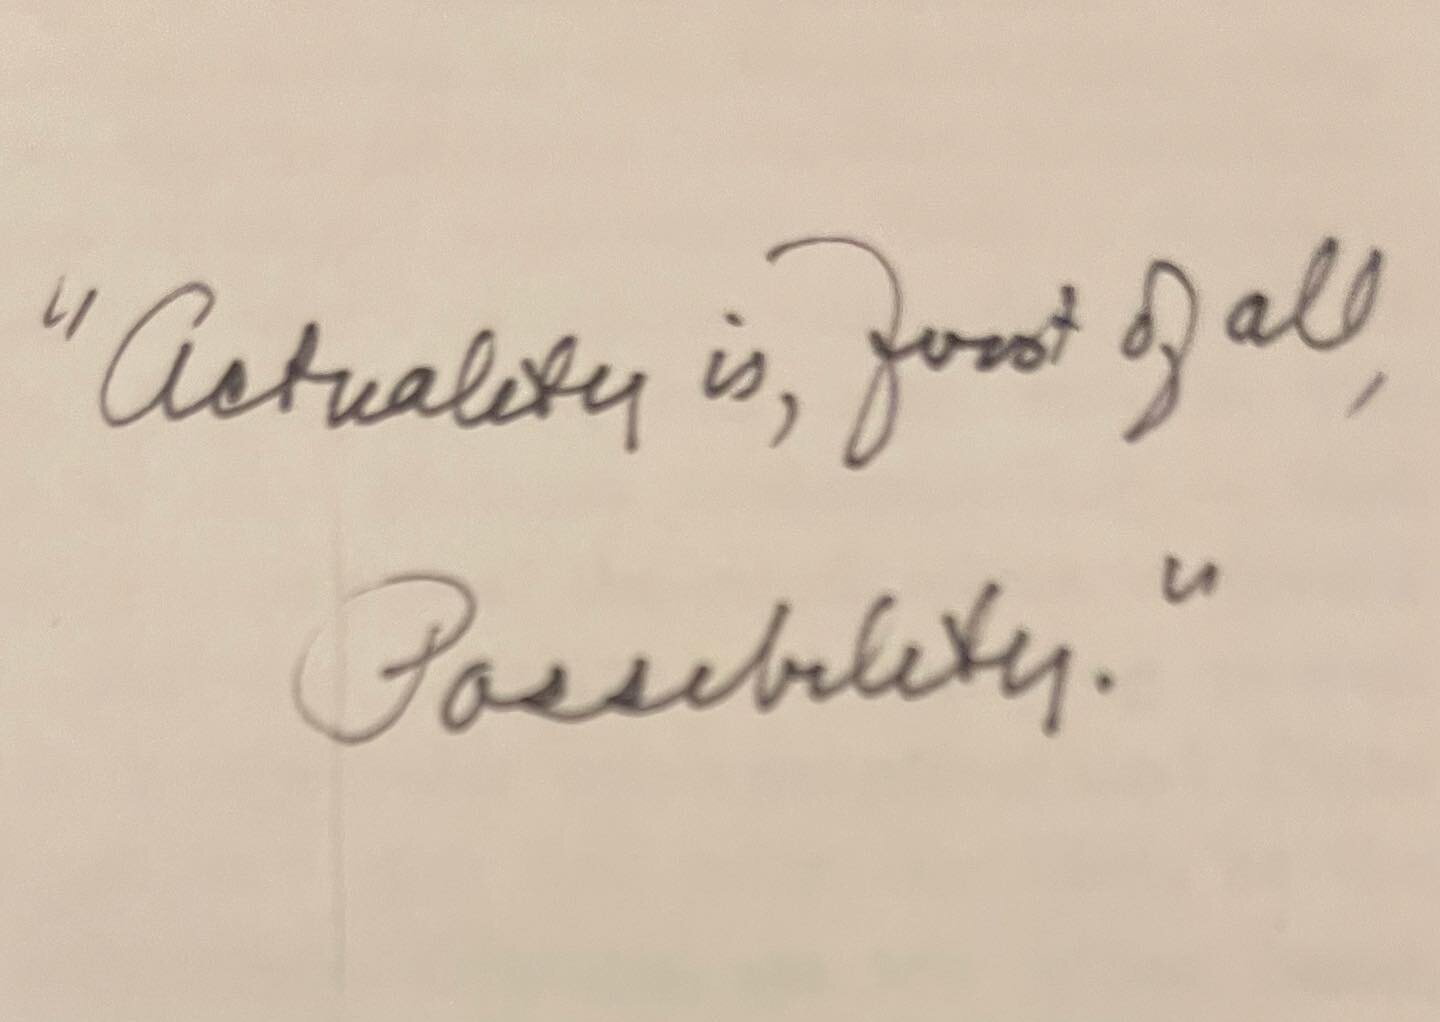 &ldquo;Actuality is, first of all, Possibility.&rdquo; A handwritten note from #graceleeboggs. Found in the personal archives of Boggs Foundation president @scottkurashige with a copy of this article on Hegel&rsquo;s Logic